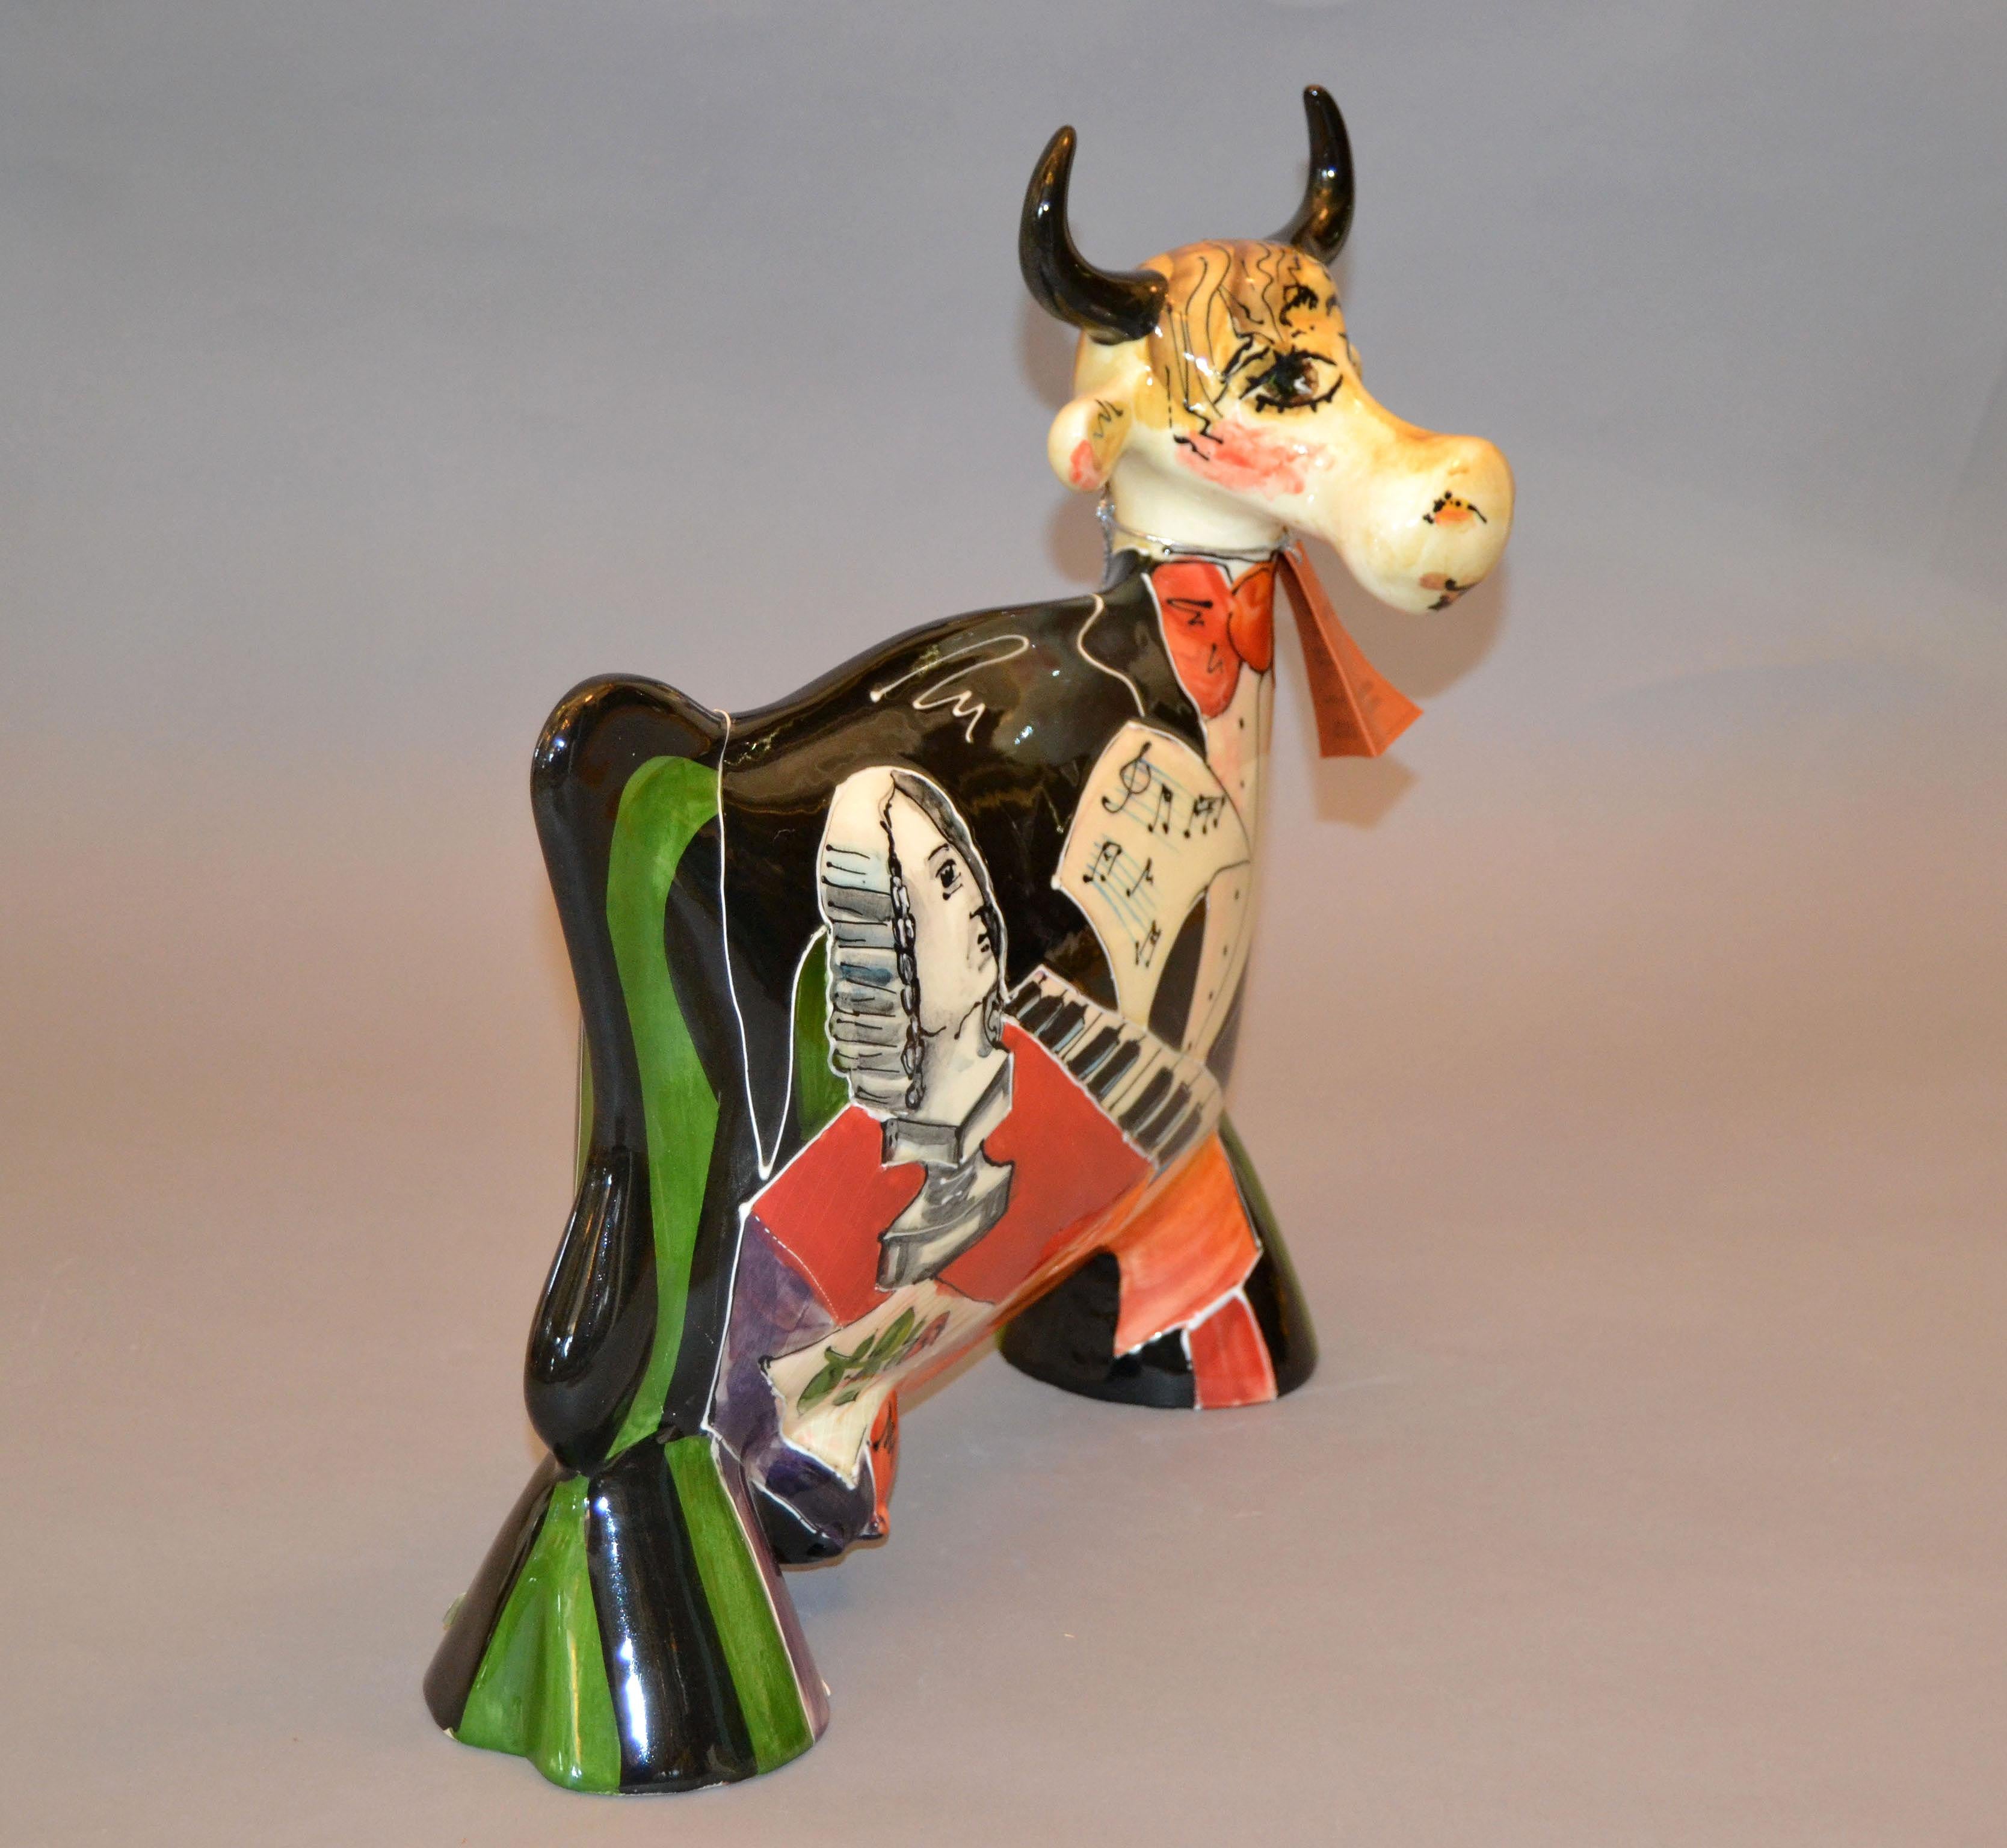 American Hand Painted Turov Art Ceramic Cow Figurine, Decorative Collectibles, Russia